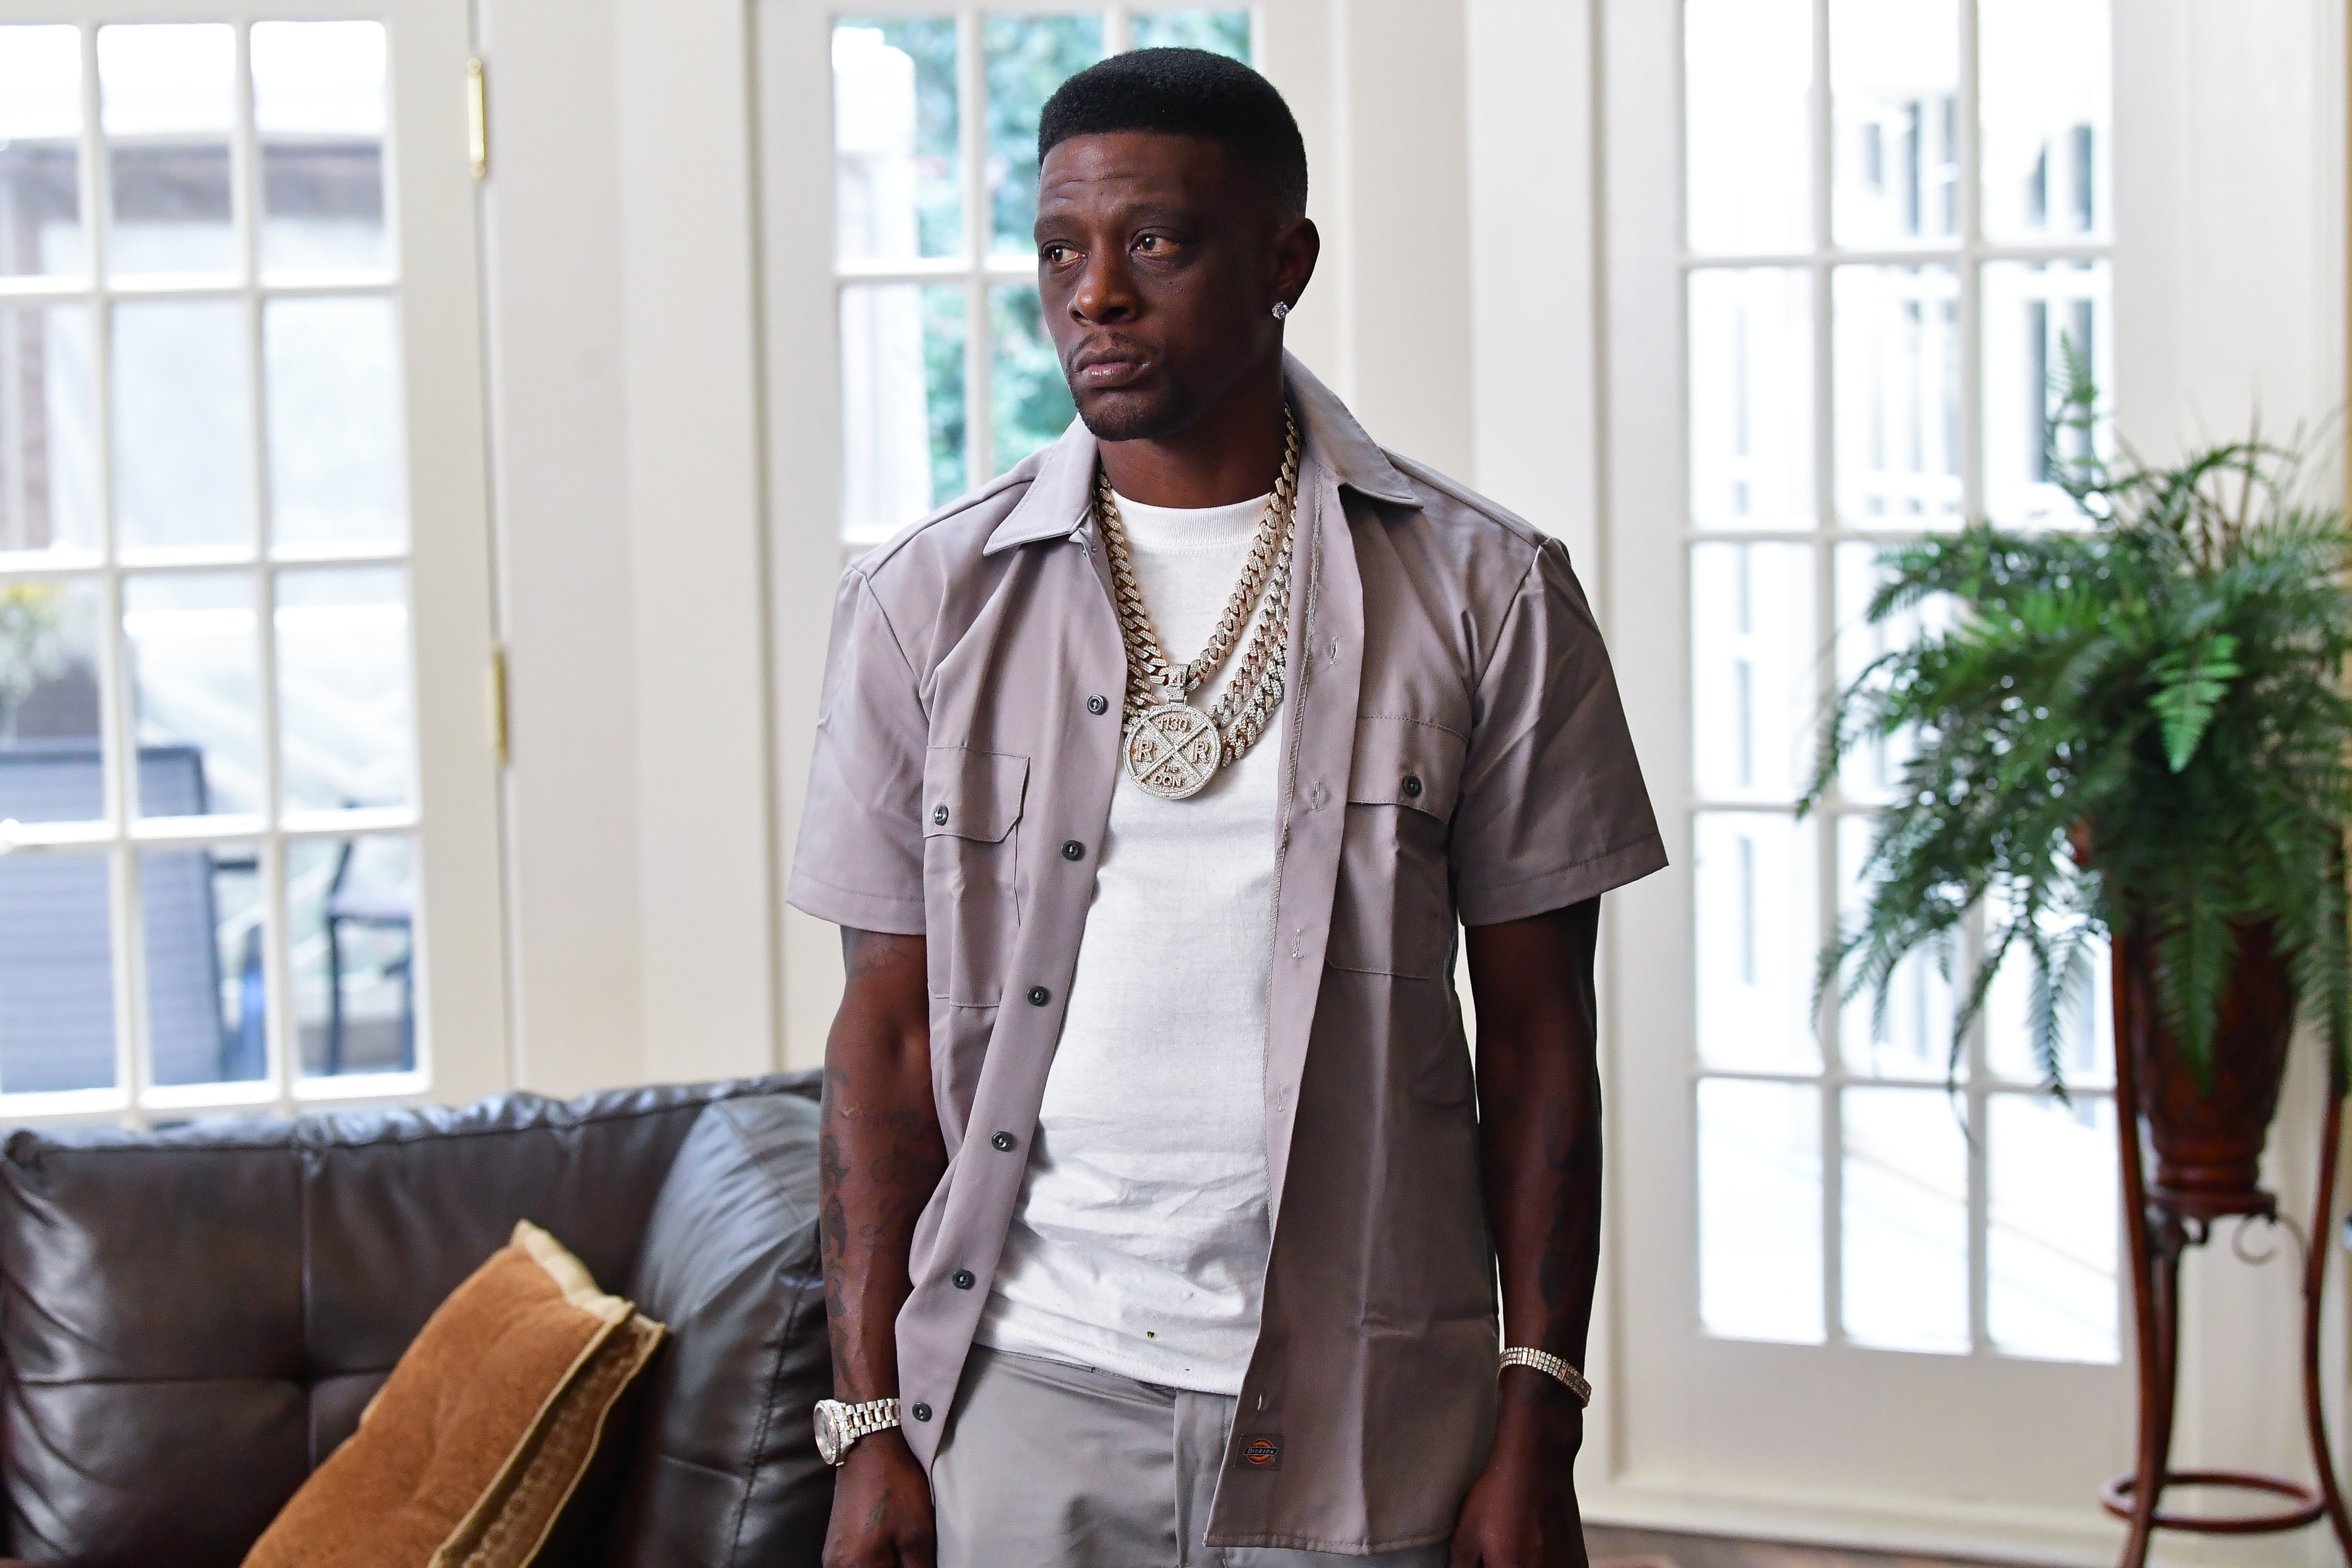 Boosie Badazz ft. Original Money Bags “Where I’m From,” R.A. The Rugged Man “Montero Remix” & More | Daily Visuals 12.9.21